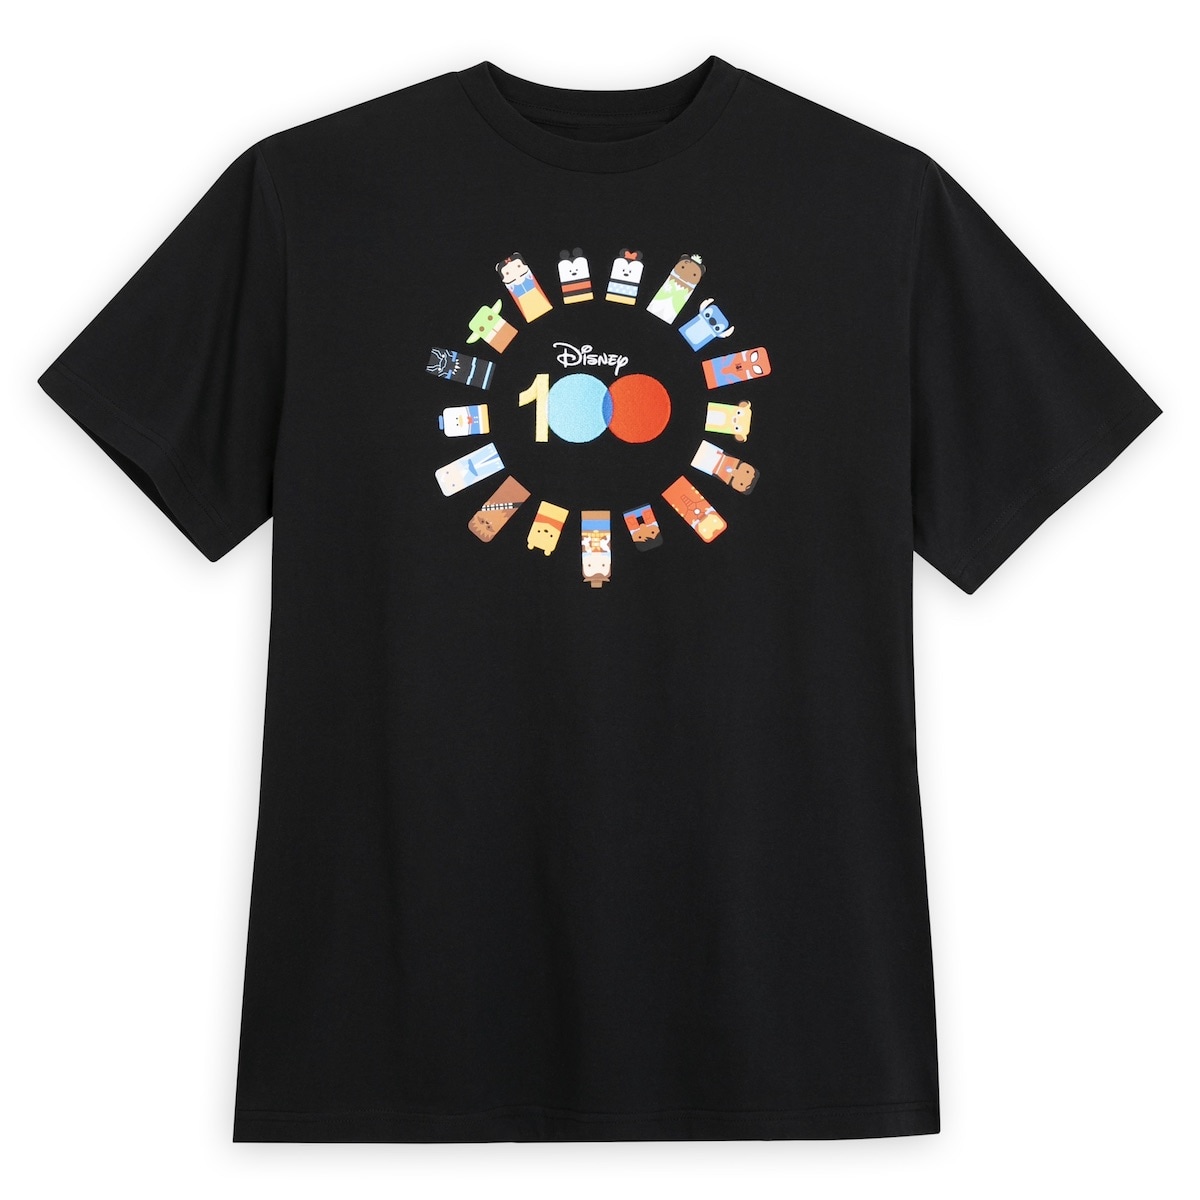 Disney100 Unified Characters Collection shirt